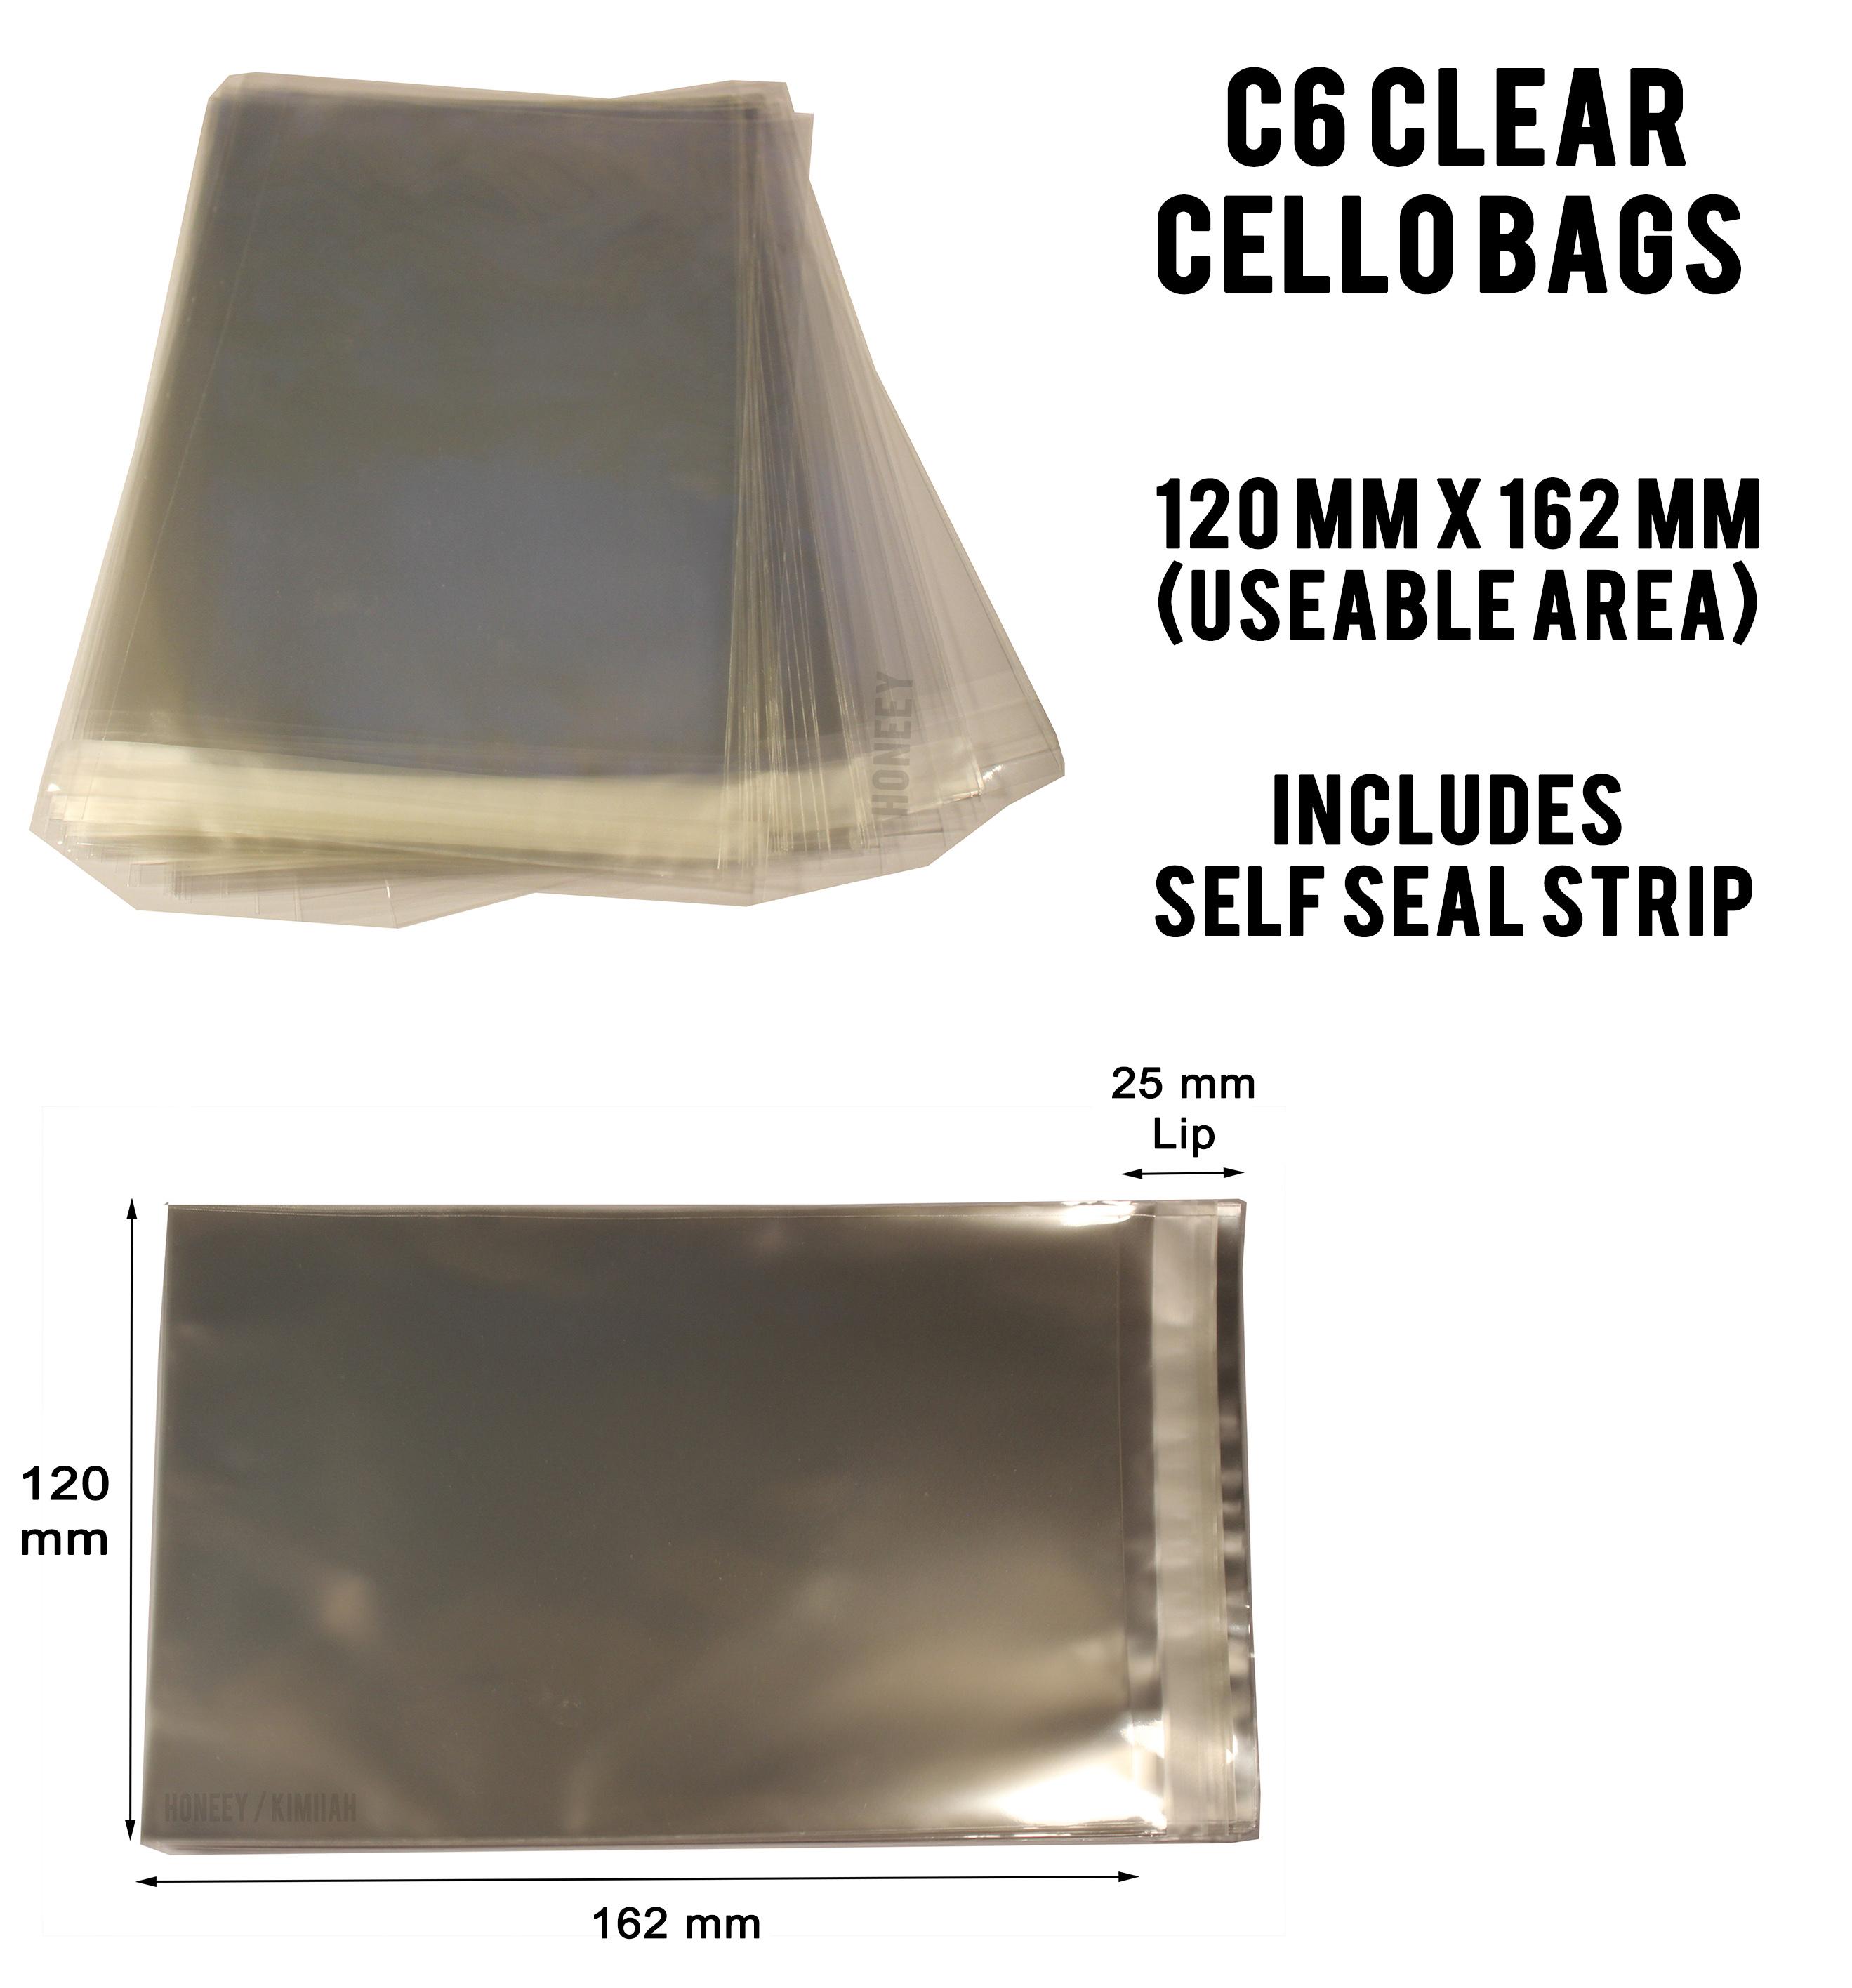 c6 cello bag with dimensions and explainer